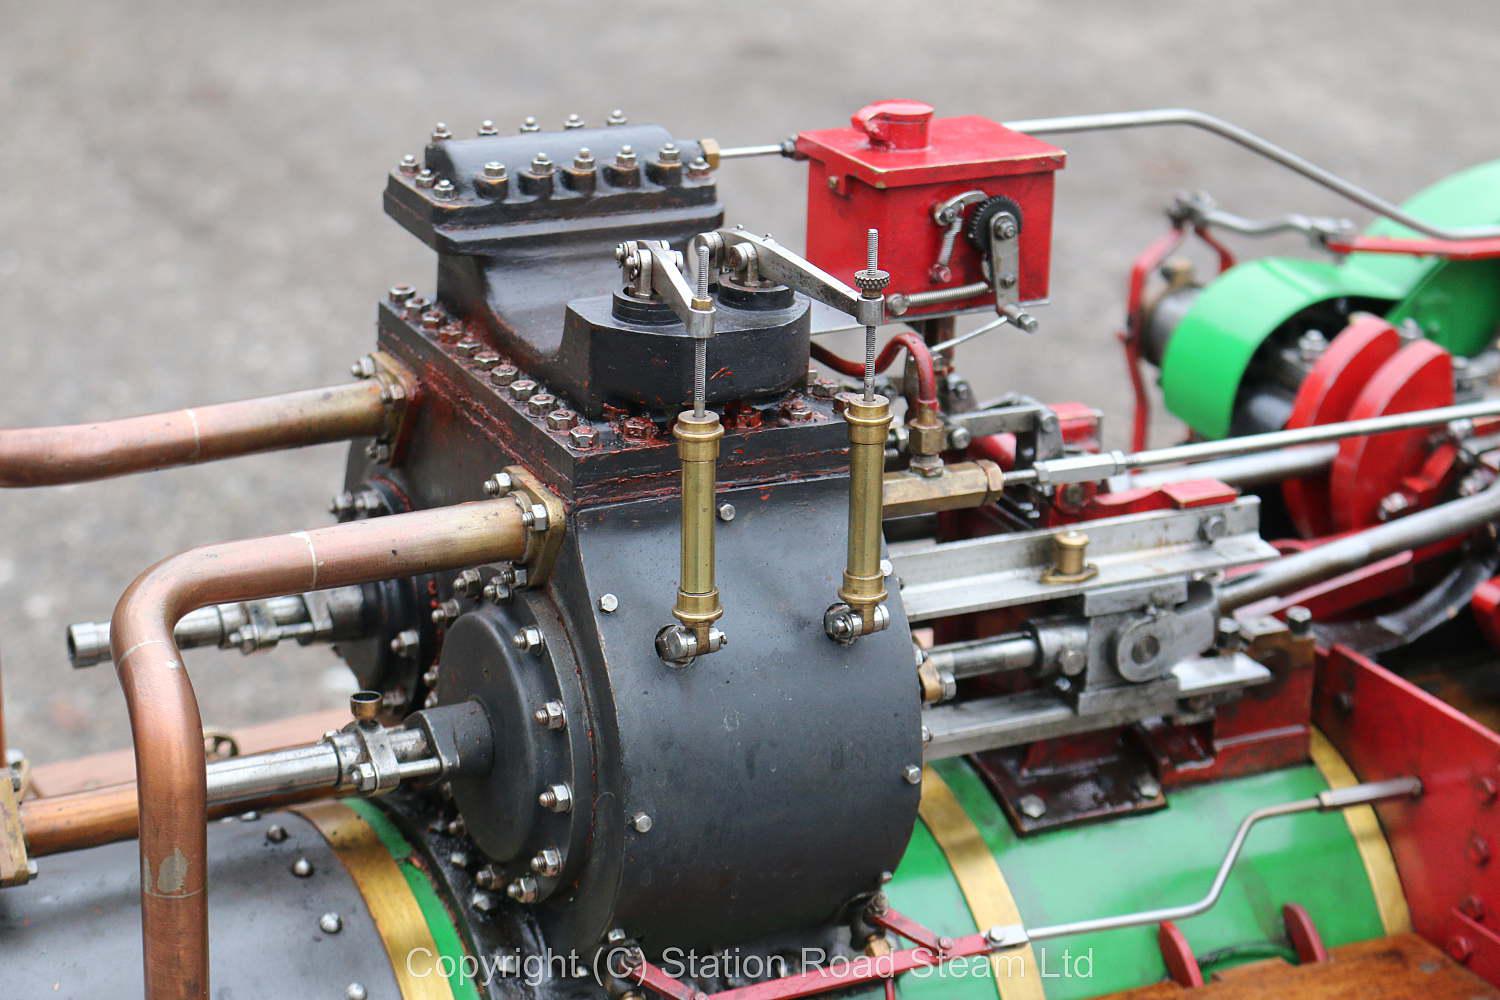 2 inch scale Fowler Z7 ploughing engine